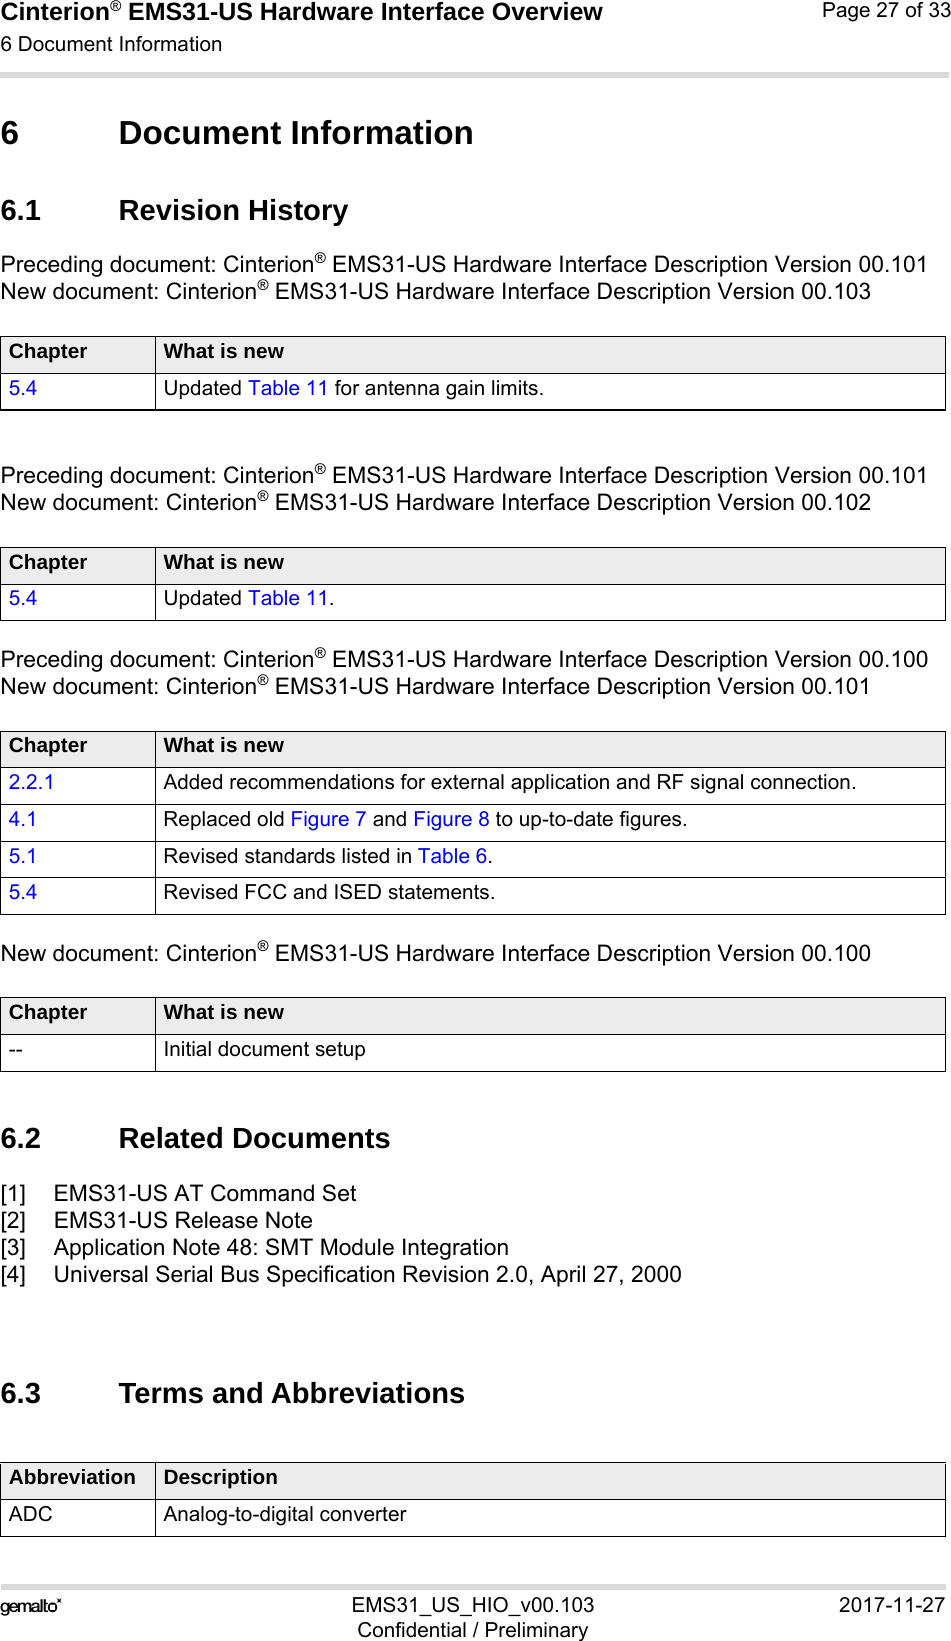 Cinterion® EMS31-US Hardware Interface Overview6 Document Information31EMS31_US_HIO_v00.103 2017-11-27Confidential / PreliminaryPage 27 of 336 Document Information6.1 Revision HistoryPreceding document: Cinterion® EMS31-US Hardware Interface Description Version 00.101New document: Cinterion® EMS31-US Hardware Interface Description Version 00.103Preceding document: Cinterion® EMS31-US Hardware Interface Description Version 00.101New document: Cinterion® EMS31-US Hardware Interface Description Version 00.102Preceding document: Cinterion® EMS31-US Hardware Interface Description Version 00.100New document: Cinterion® EMS31-US Hardware Interface Description Version 00.101New document: Cinterion® EMS31-US Hardware Interface Description Version 00.1006.2 Related Documents[1] EMS31-US AT Command Set[2] EMS31-US Release Note[3] Application Note 48: SMT Module Integration[4] Universal Serial Bus Specification Revision 2.0, April 27, 20006.3 Terms and AbbreviationsChapter What is new5.4 Updated Table 11 for antenna gain limits.Chapter What is new5.4 Updated Table 11.Chapter What is new2.2.1 Added recommendations for external application and RF signal connection.4.1 Replaced old Figure 7 and Figure 8 to up-to-date figures.5.1 Revised standards listed in Table 6.5.4 Revised FCC and ISED statements.Chapter What is new-- Initial document setupAbbreviation DescriptionADC Analog-to-digital converter